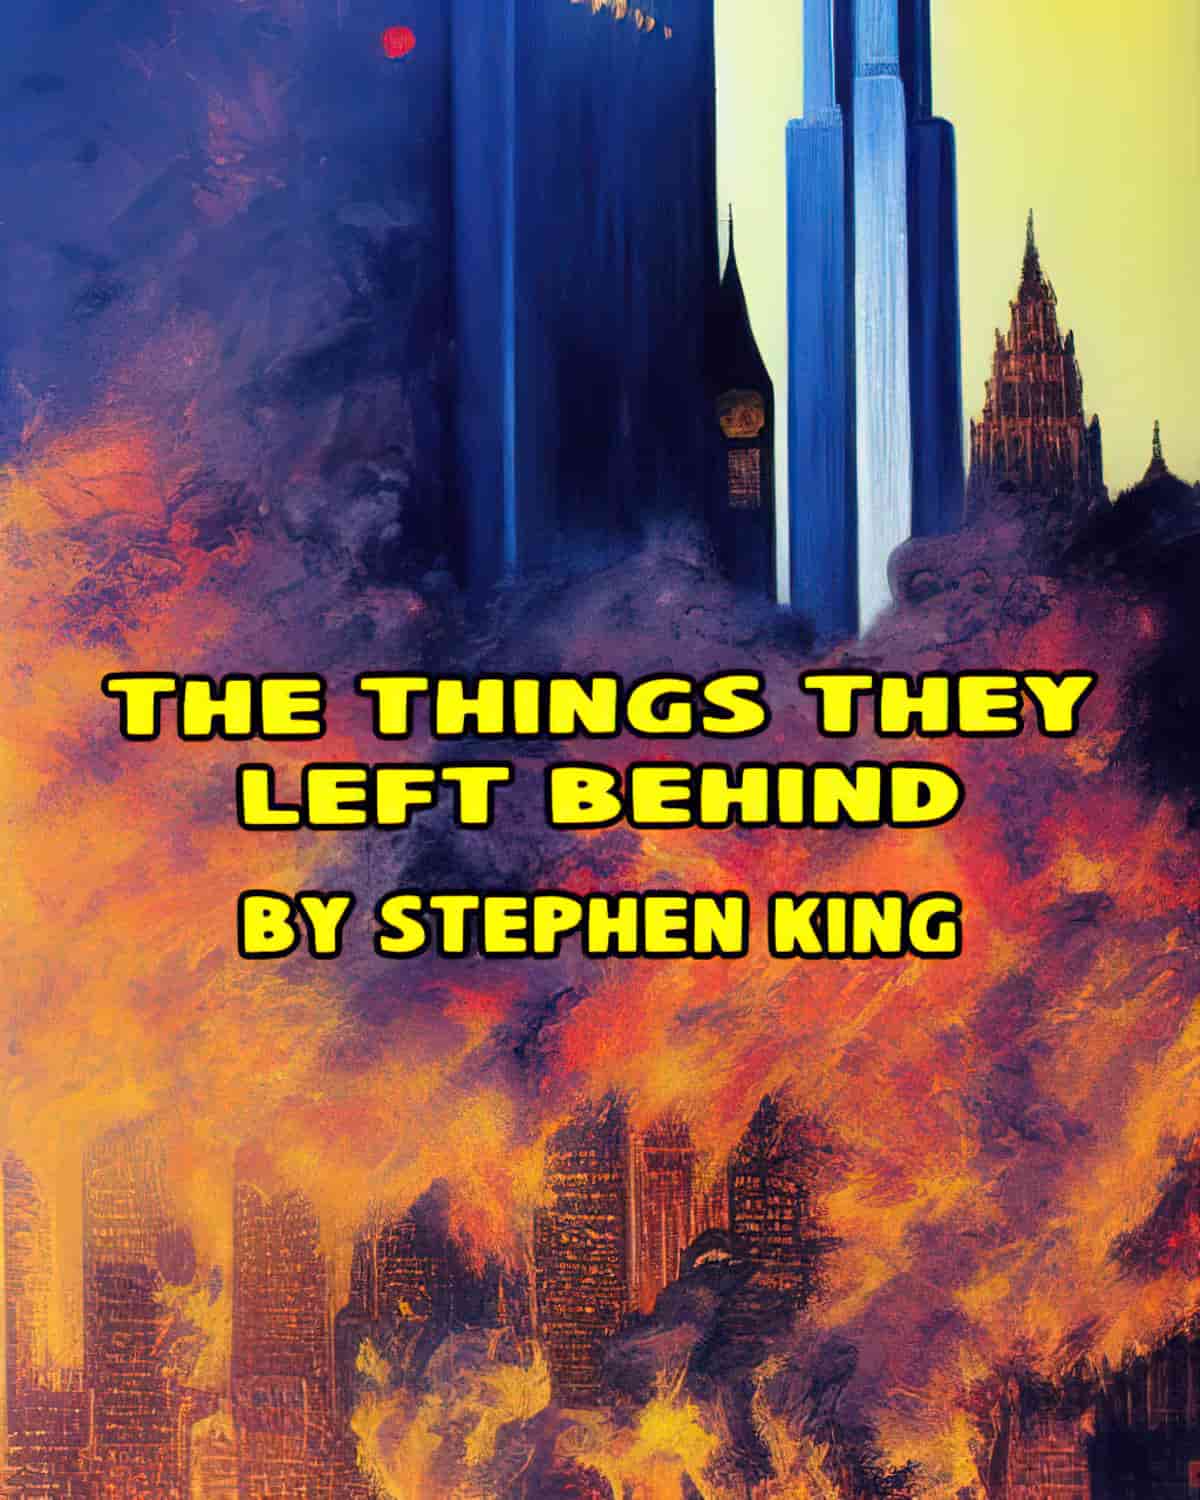 The Things They Left Behind by Stephen King Short Story Analysis